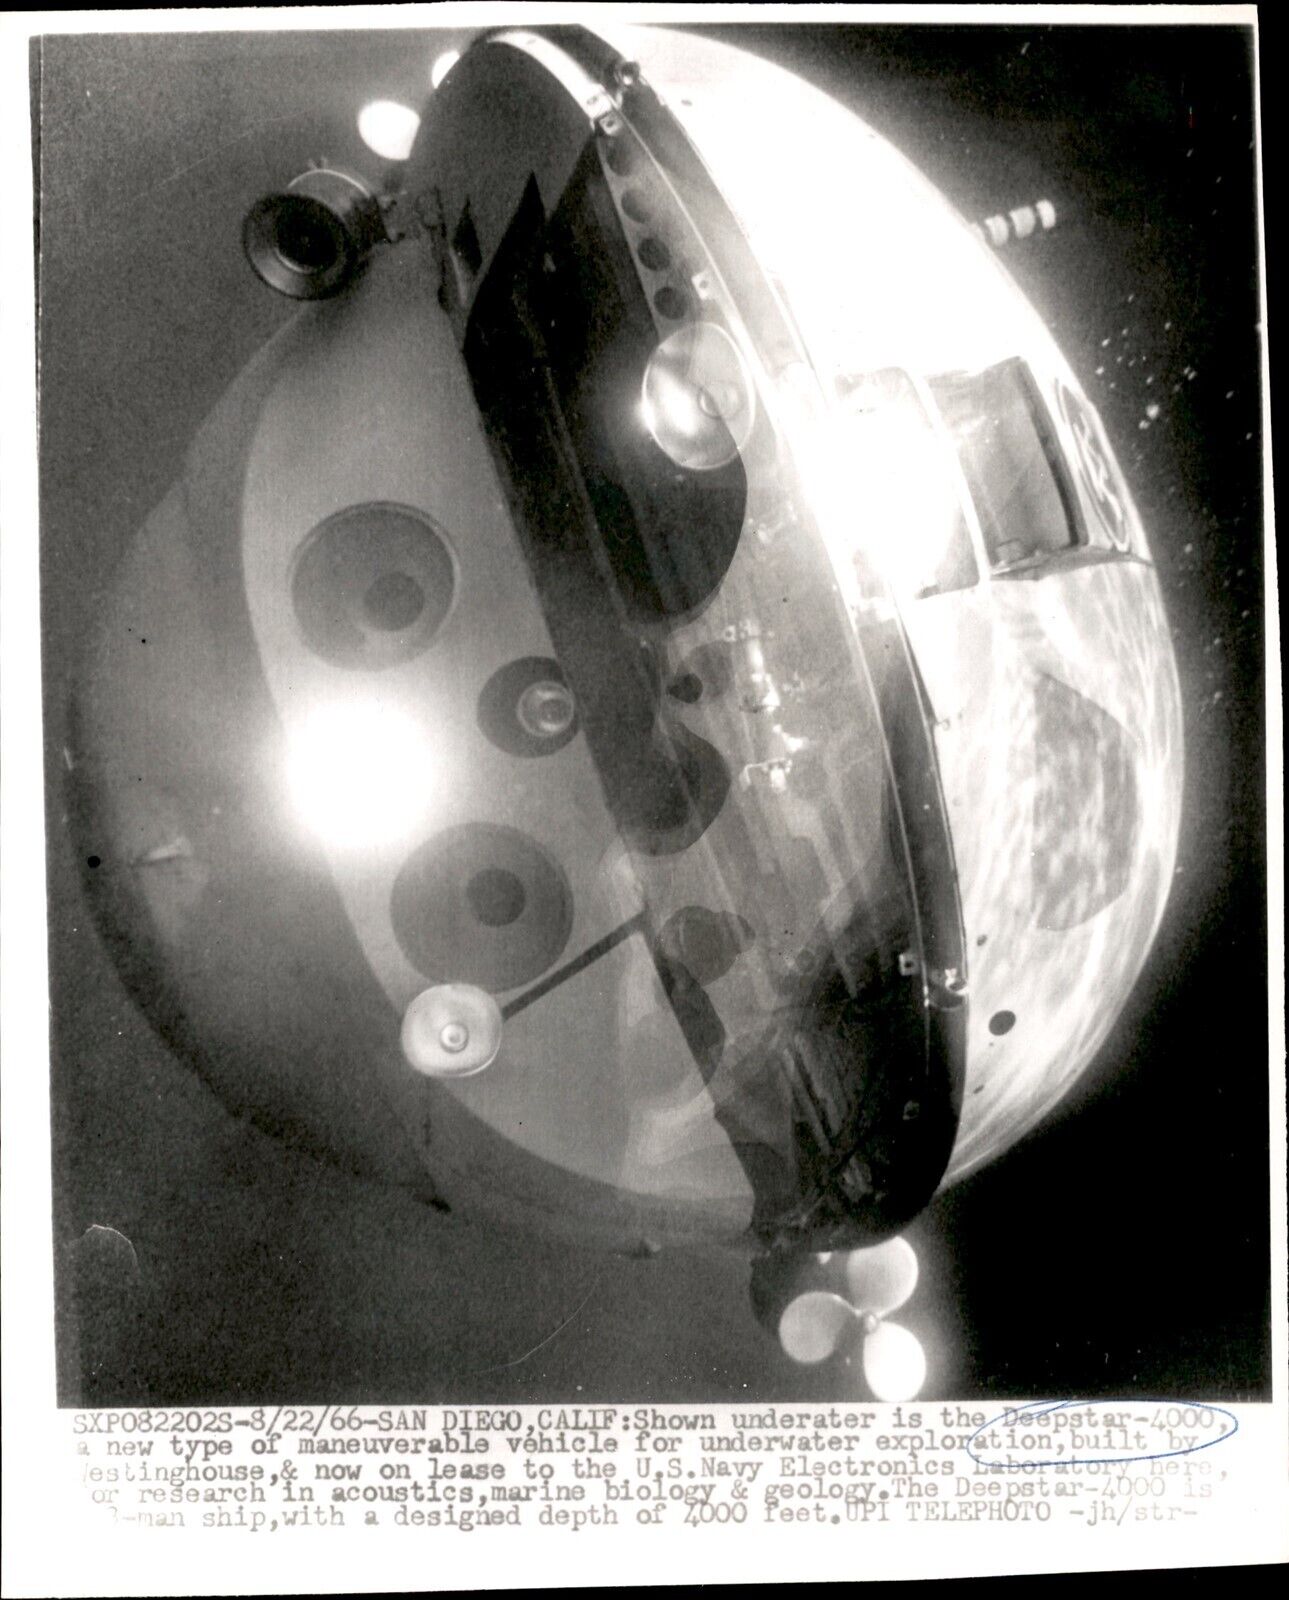 LG44 1966 Wire Photo US NAVY WESTINGHOUSE DEEPSTAR-4000 UNDERWATER SUBMERSIBLE